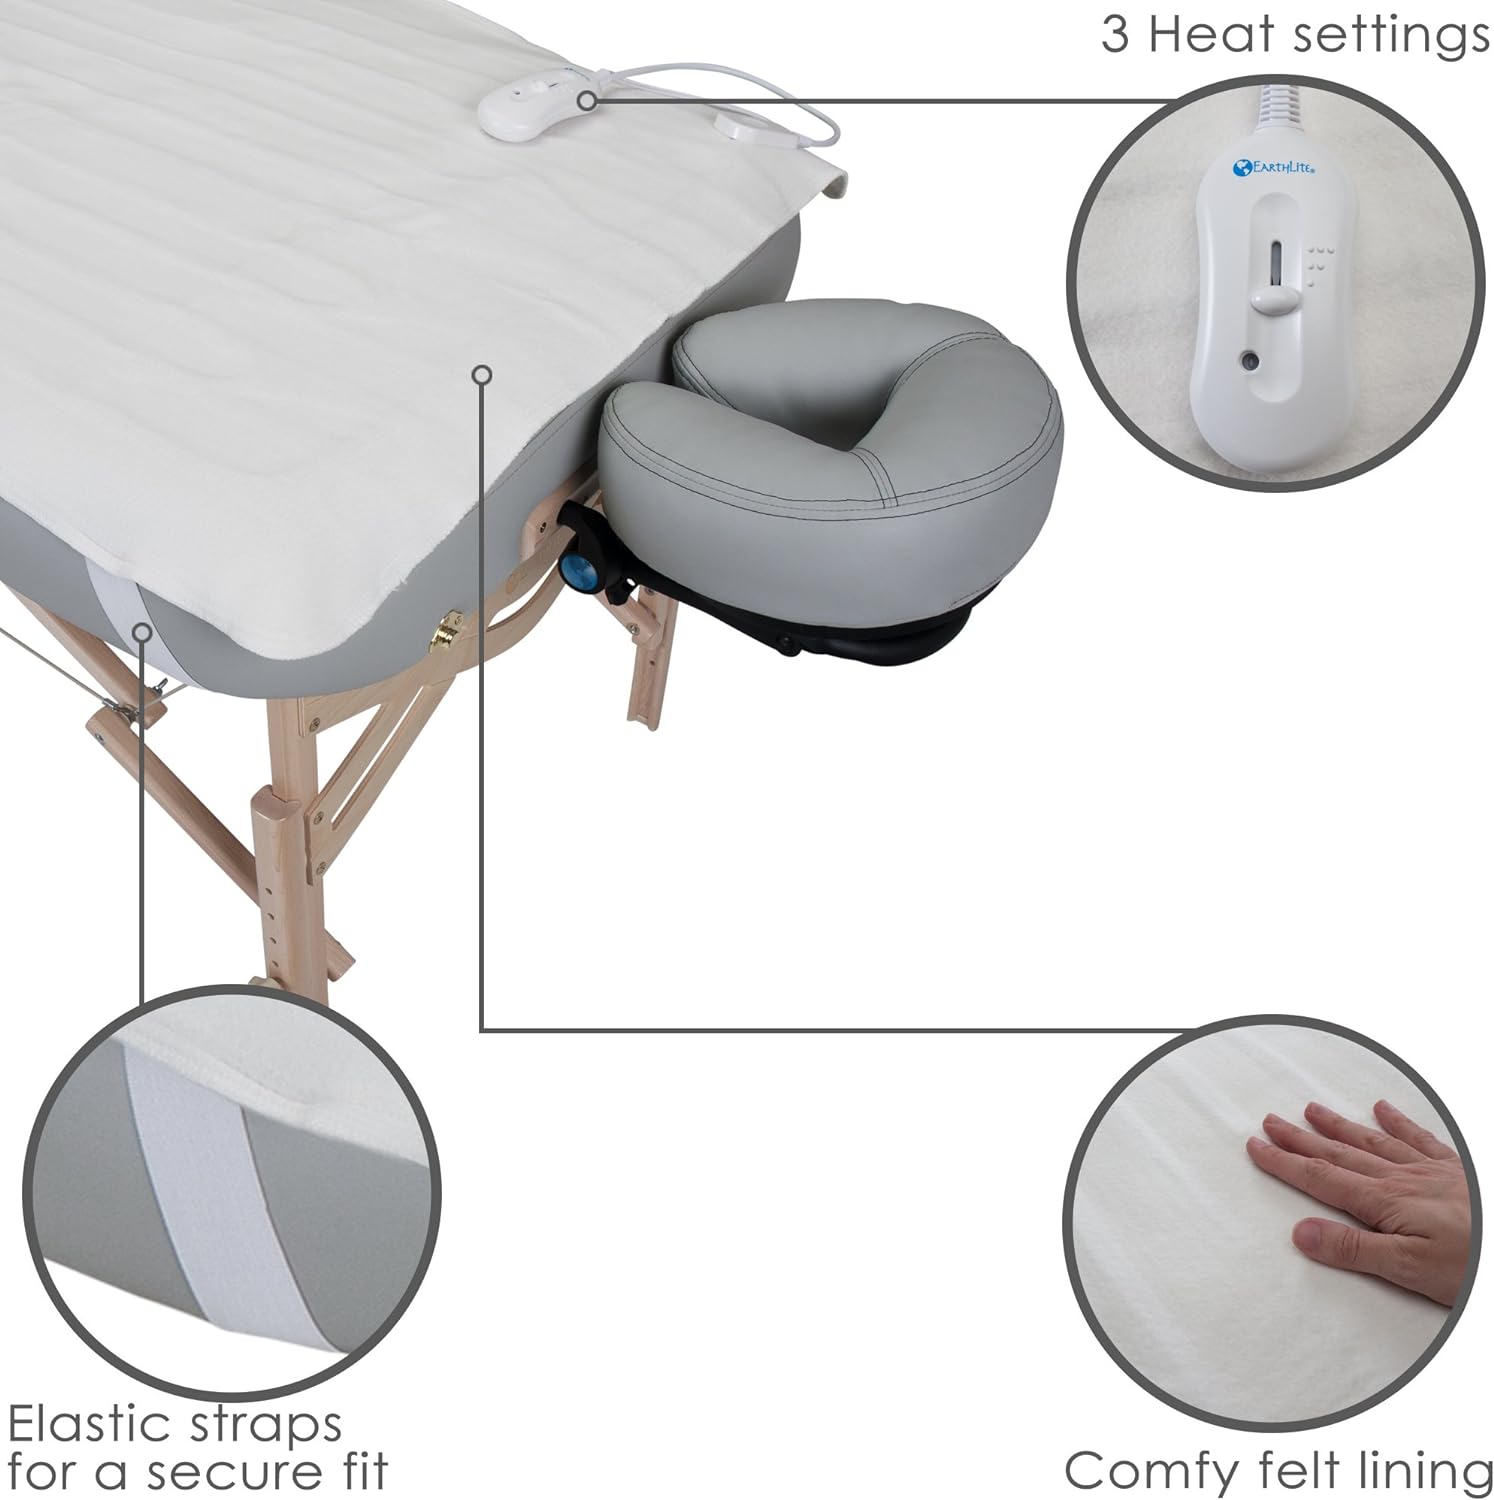 BODYWORKER’S CHOICE Massage Table Warmer – Three Heat Settings, Felt Lined Heating Pad (30” x 71”) | One-Year Replacement Guarantee